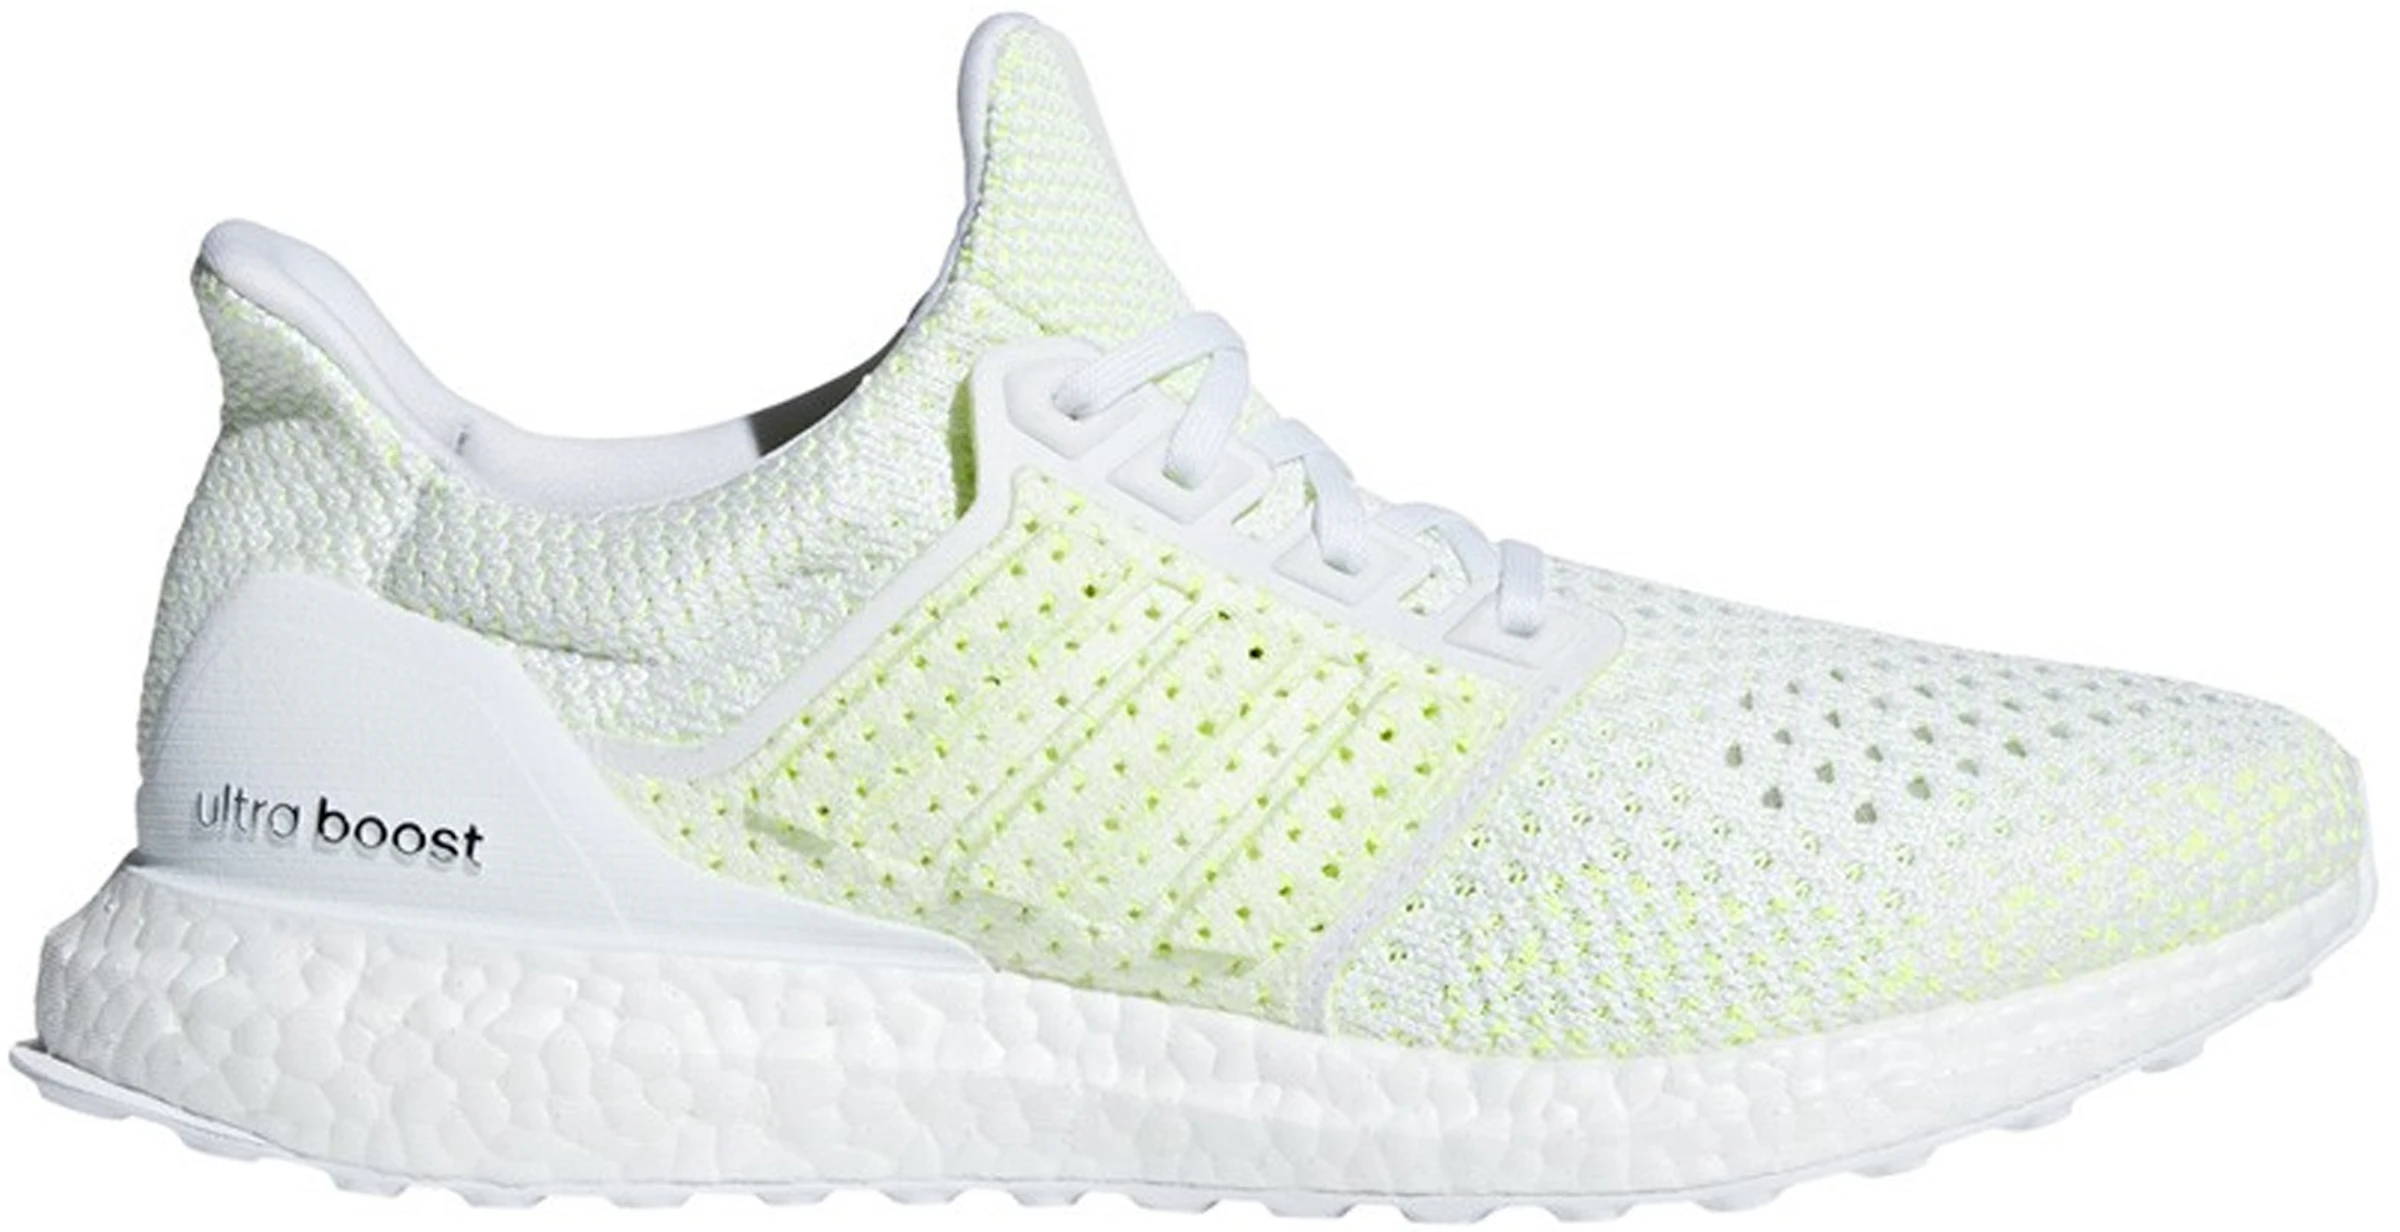 adidas Ultra Boost Clima White Shock Yellow (Youth) - B43506 - ES